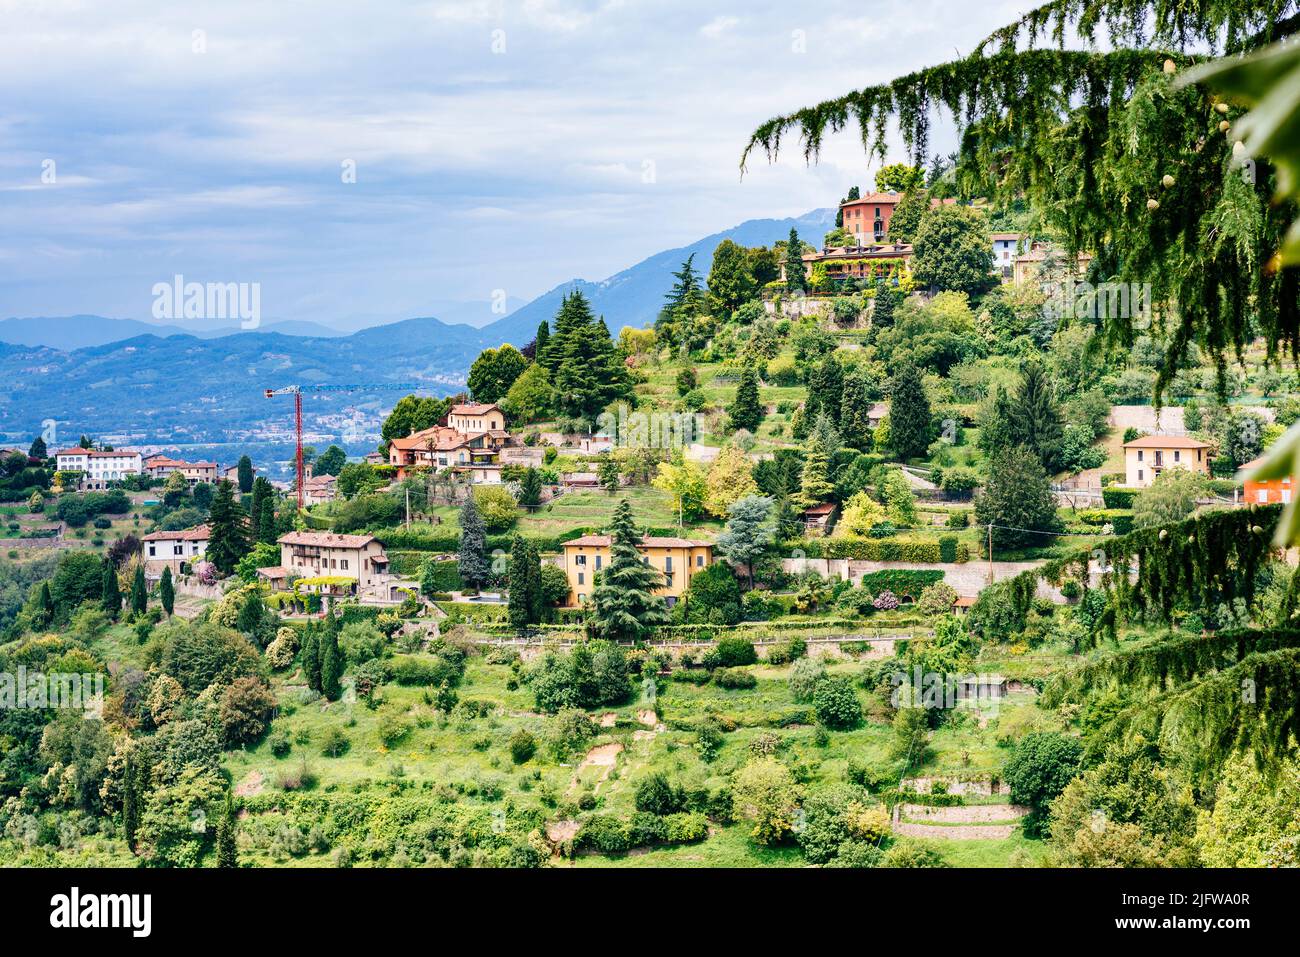 Stately homes on the hill of San Vigilio, at the top of which is the castle of San Vigilio that protected the city since medieval times. Bergamo, Lomb Stock Photo